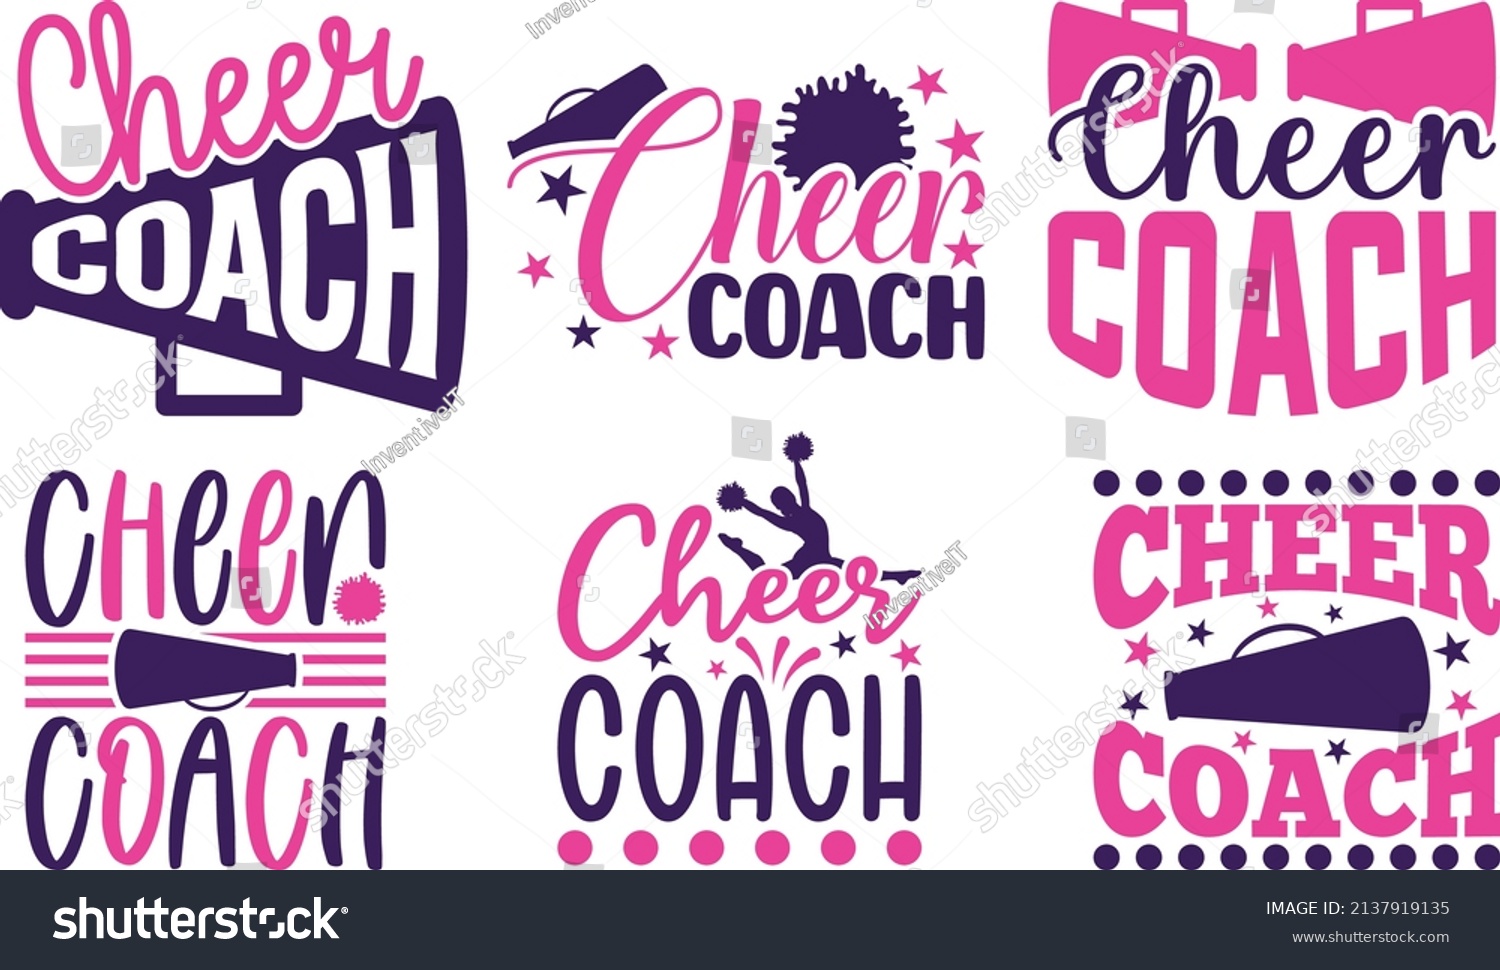 SVG of Cheer Coach Holiday Printable Vector Illustration svg